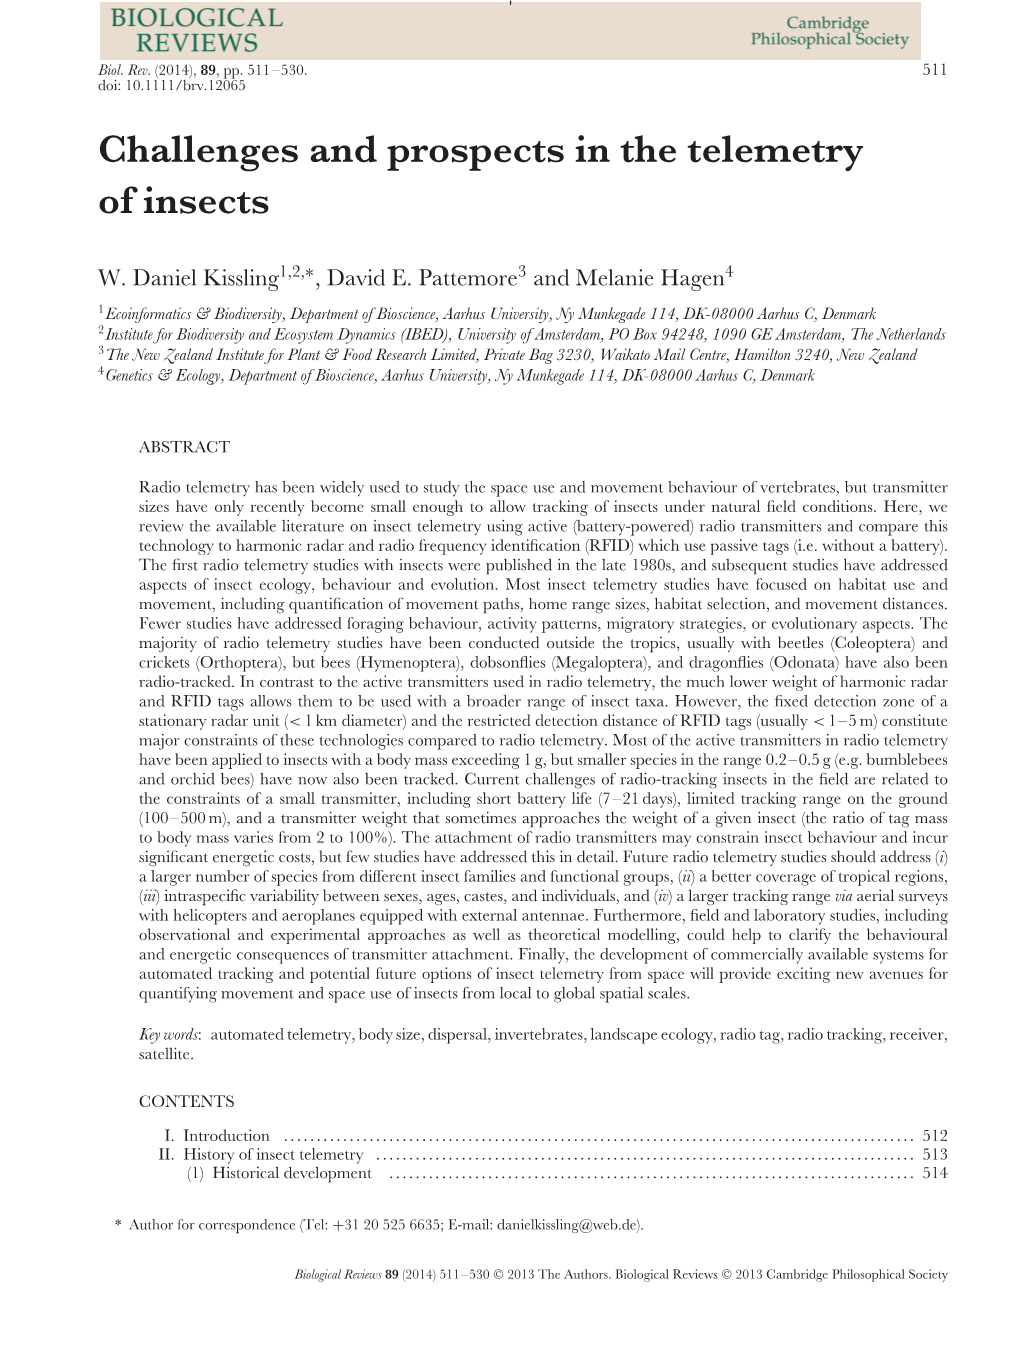 Challenges and Prospects in the Telemetry of Insects